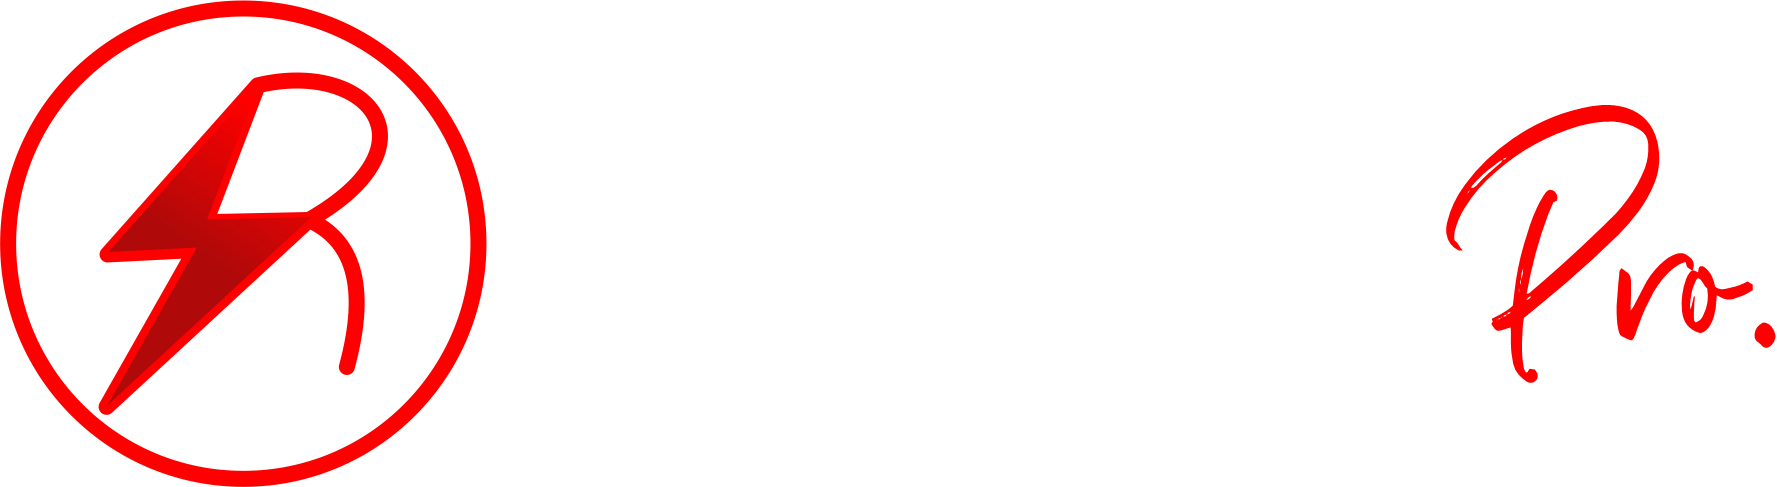 Recoveries Pro